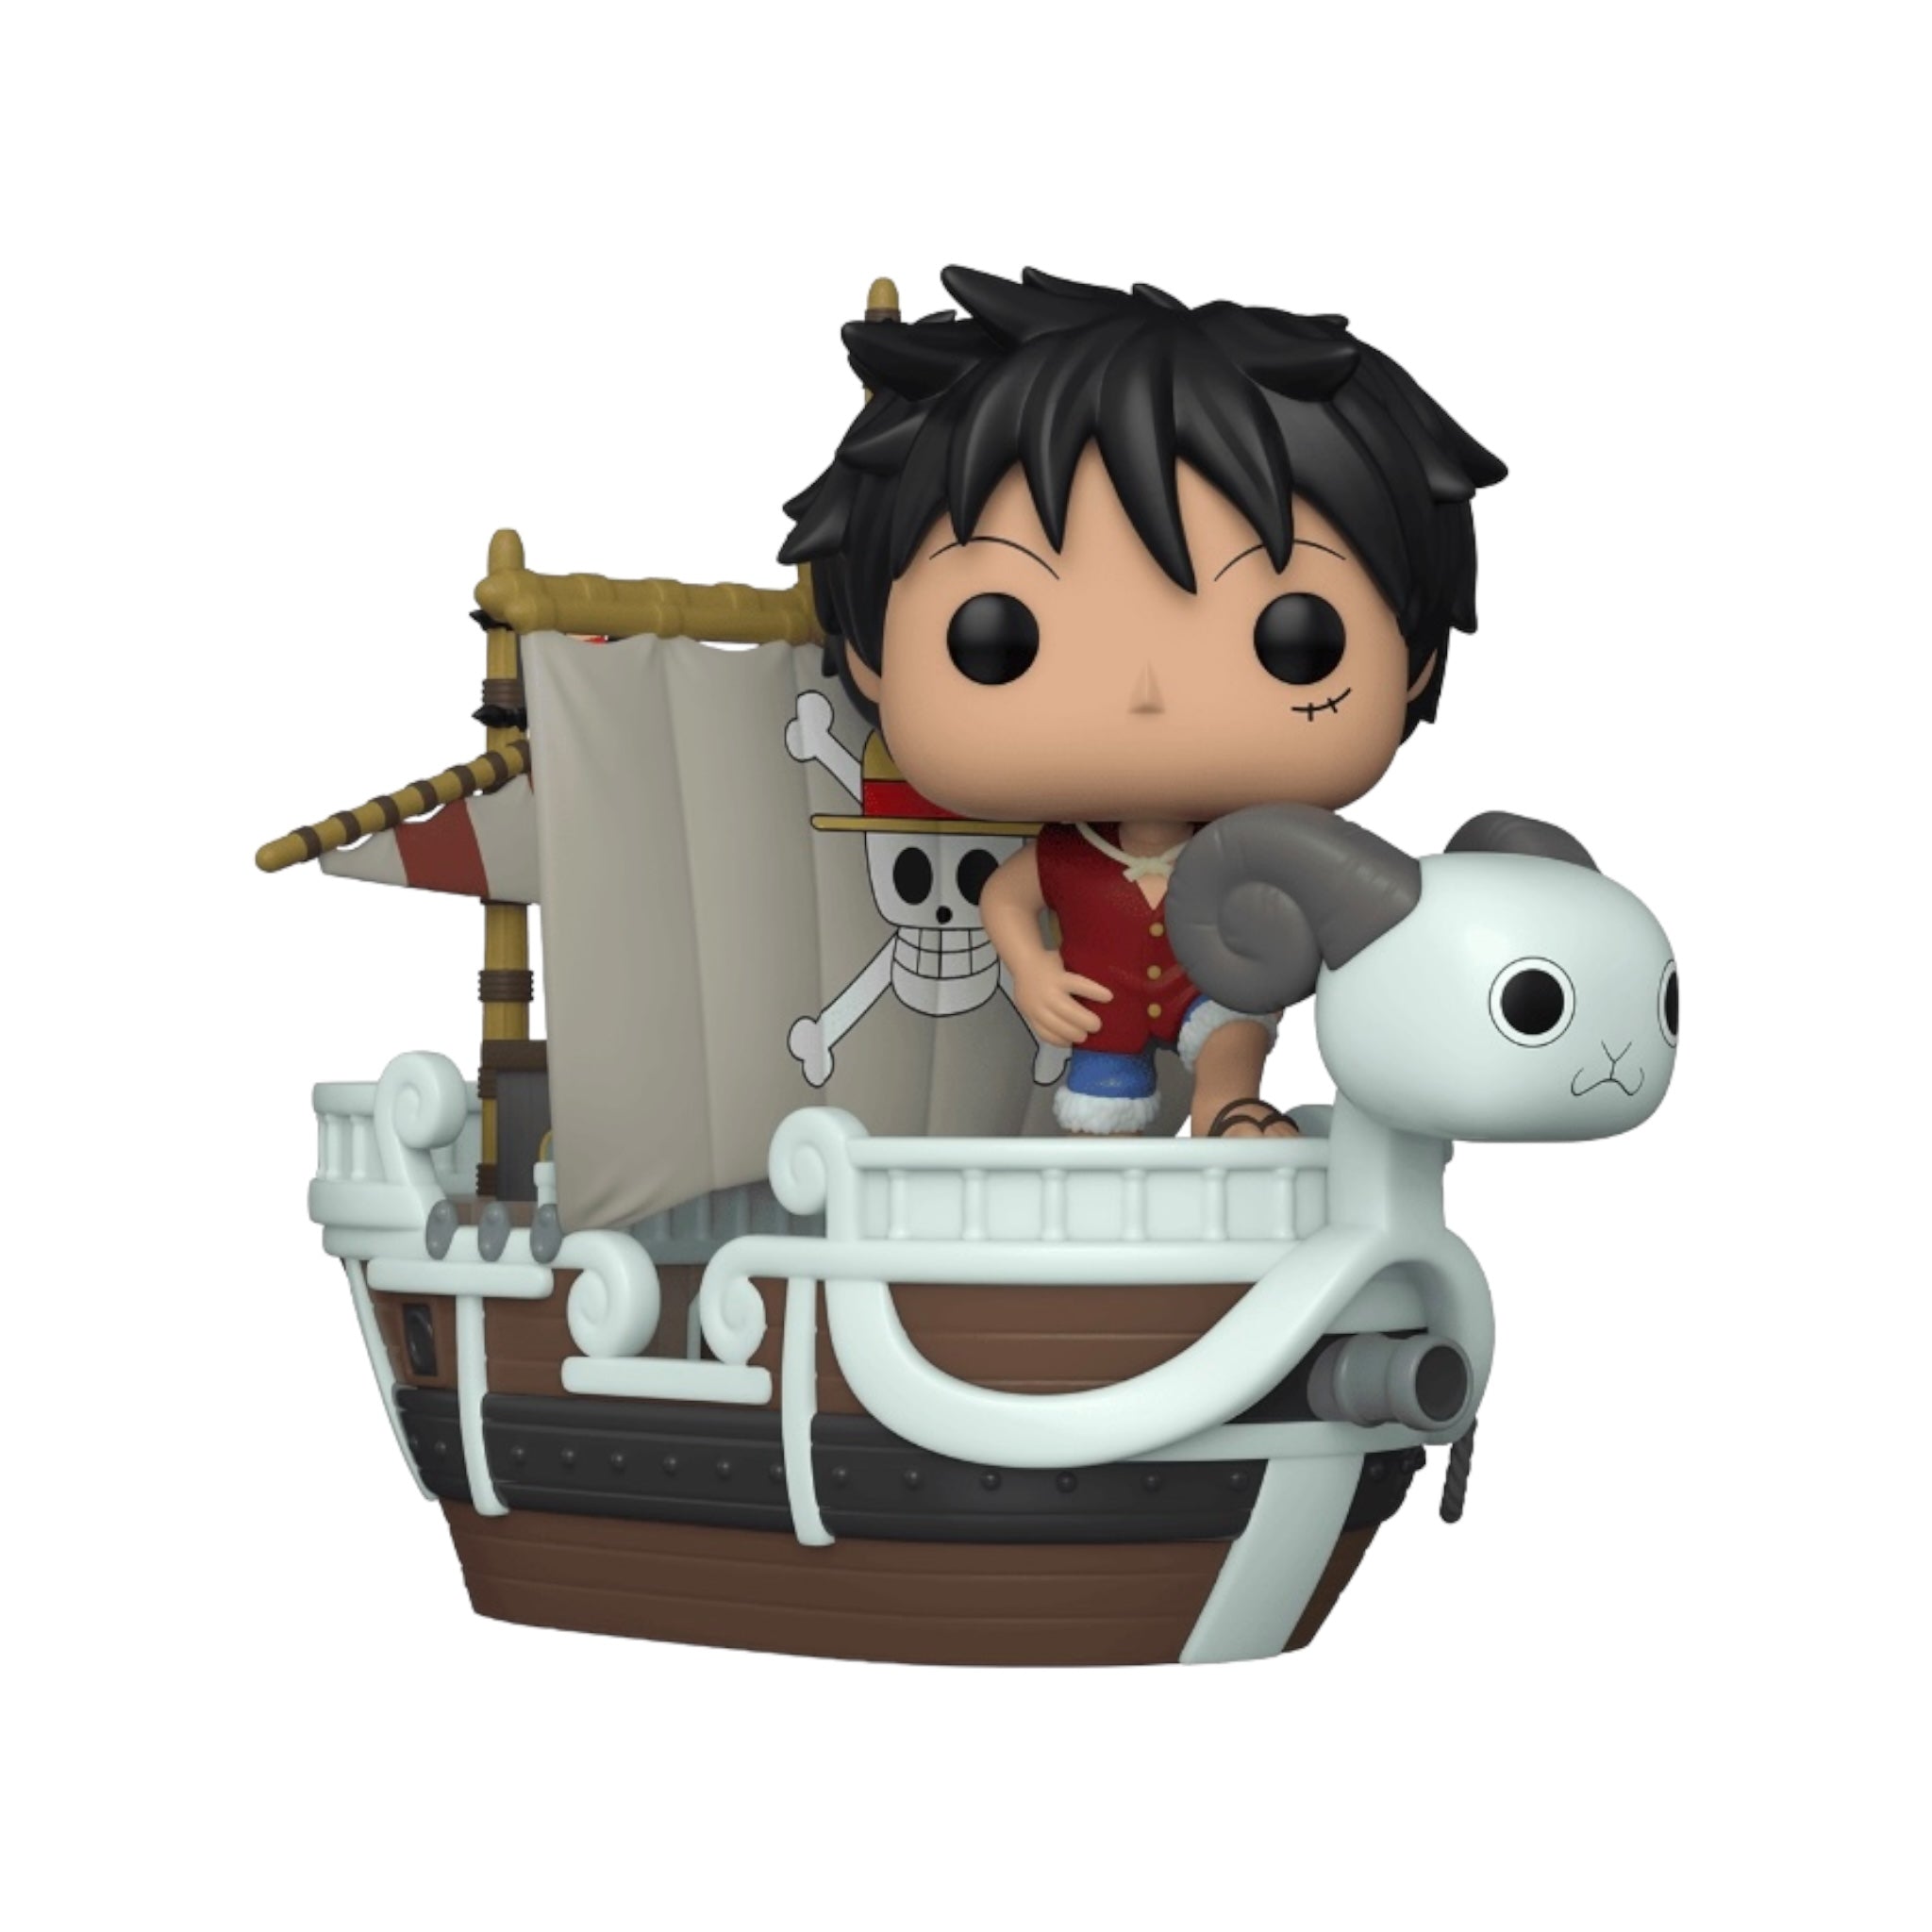 Luffy with Going Merry #111 Funko Pop Ride! - One Piece - NYCC 2022 Shared Exclusive - Condition 8.5/10*